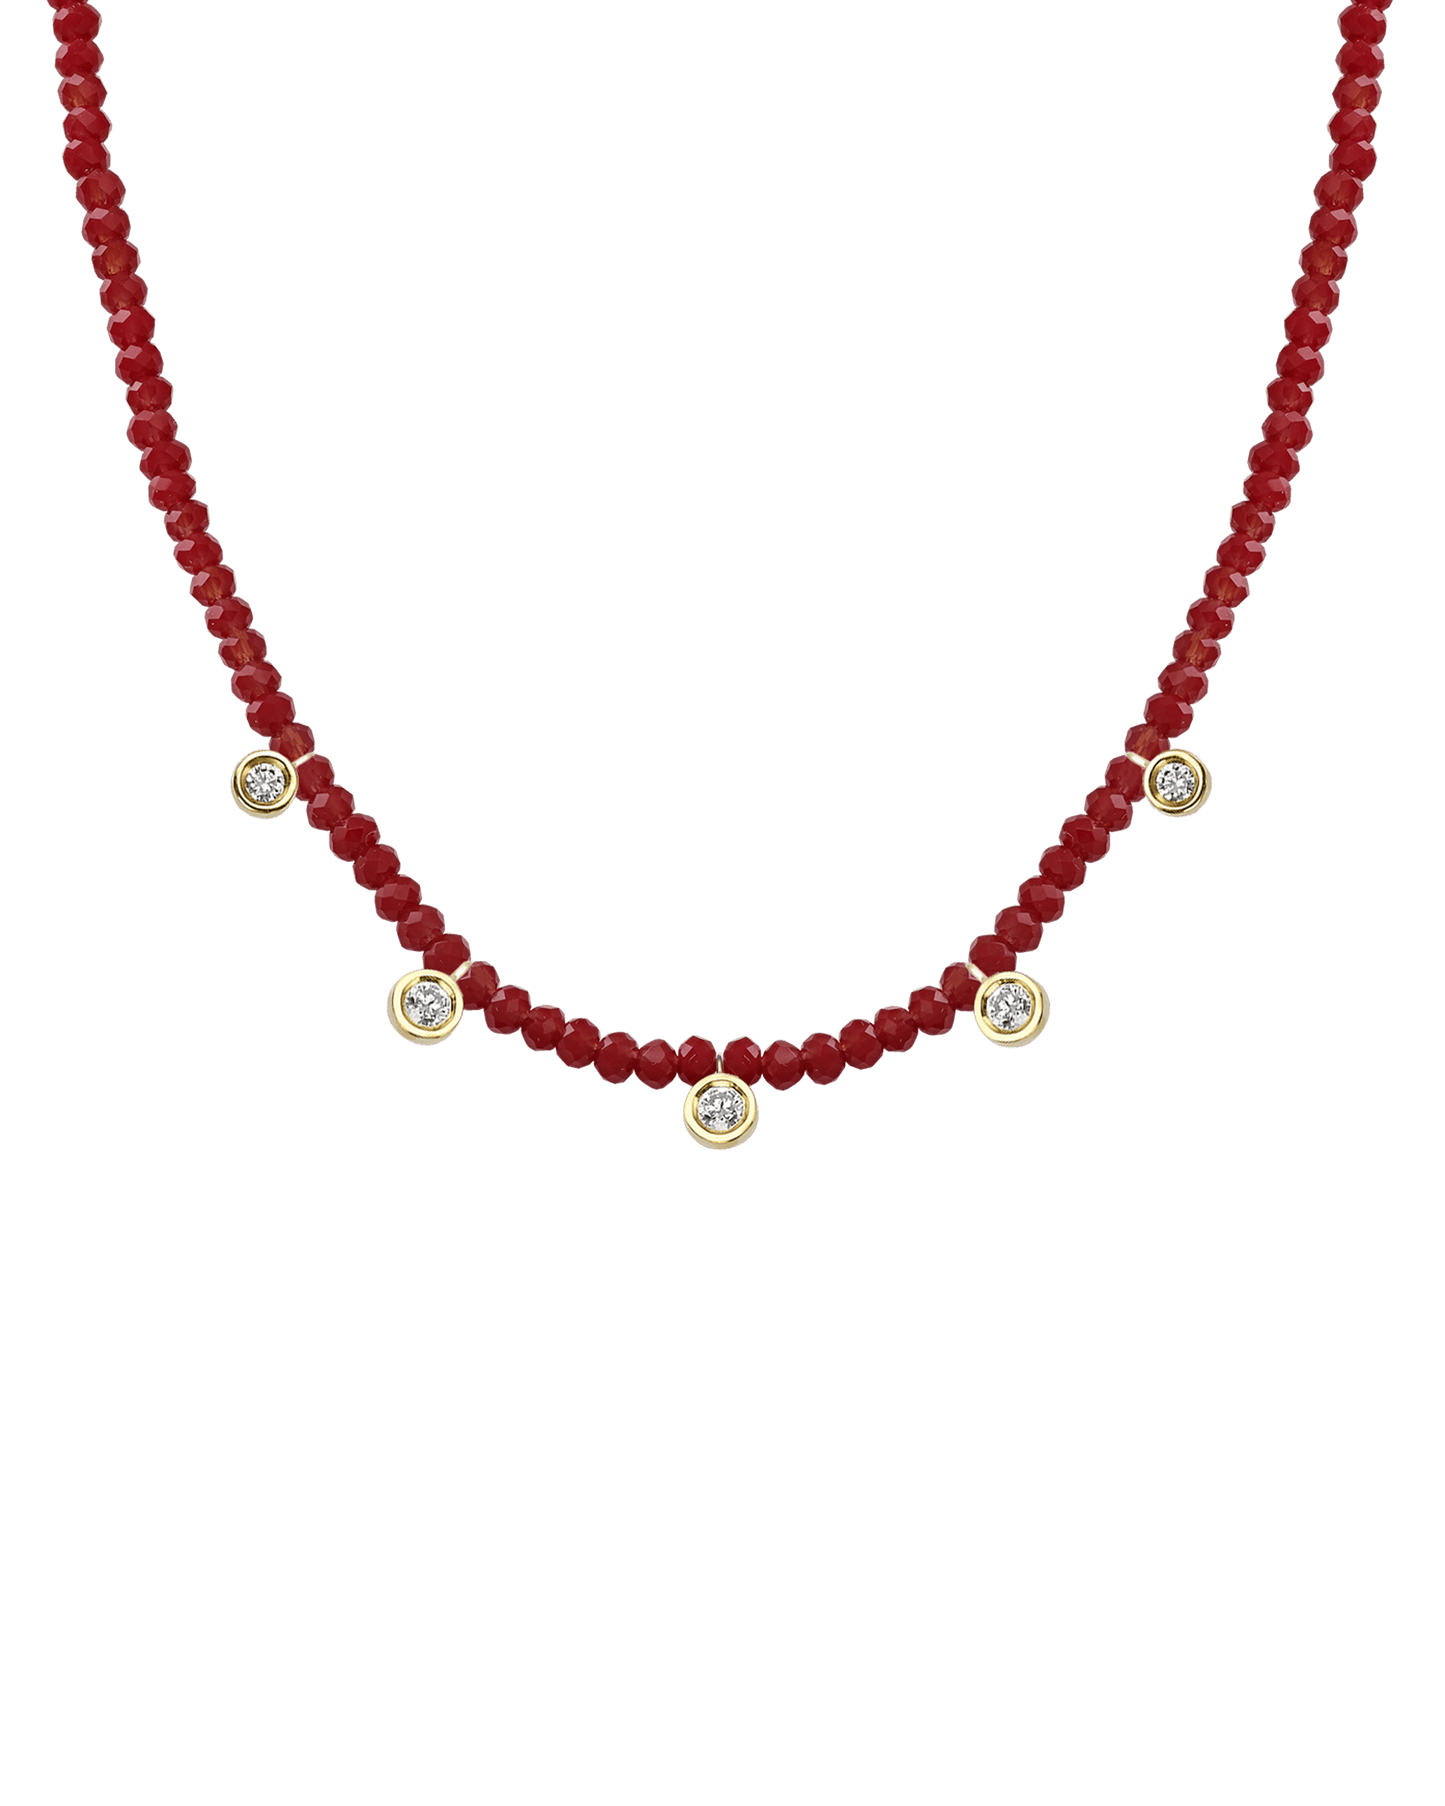 Black Spinel Gemstone & Five diamonds Necklace - 14K Yellow Gold Necklaces magal-dev Natural Red Jade 14" - Collar 